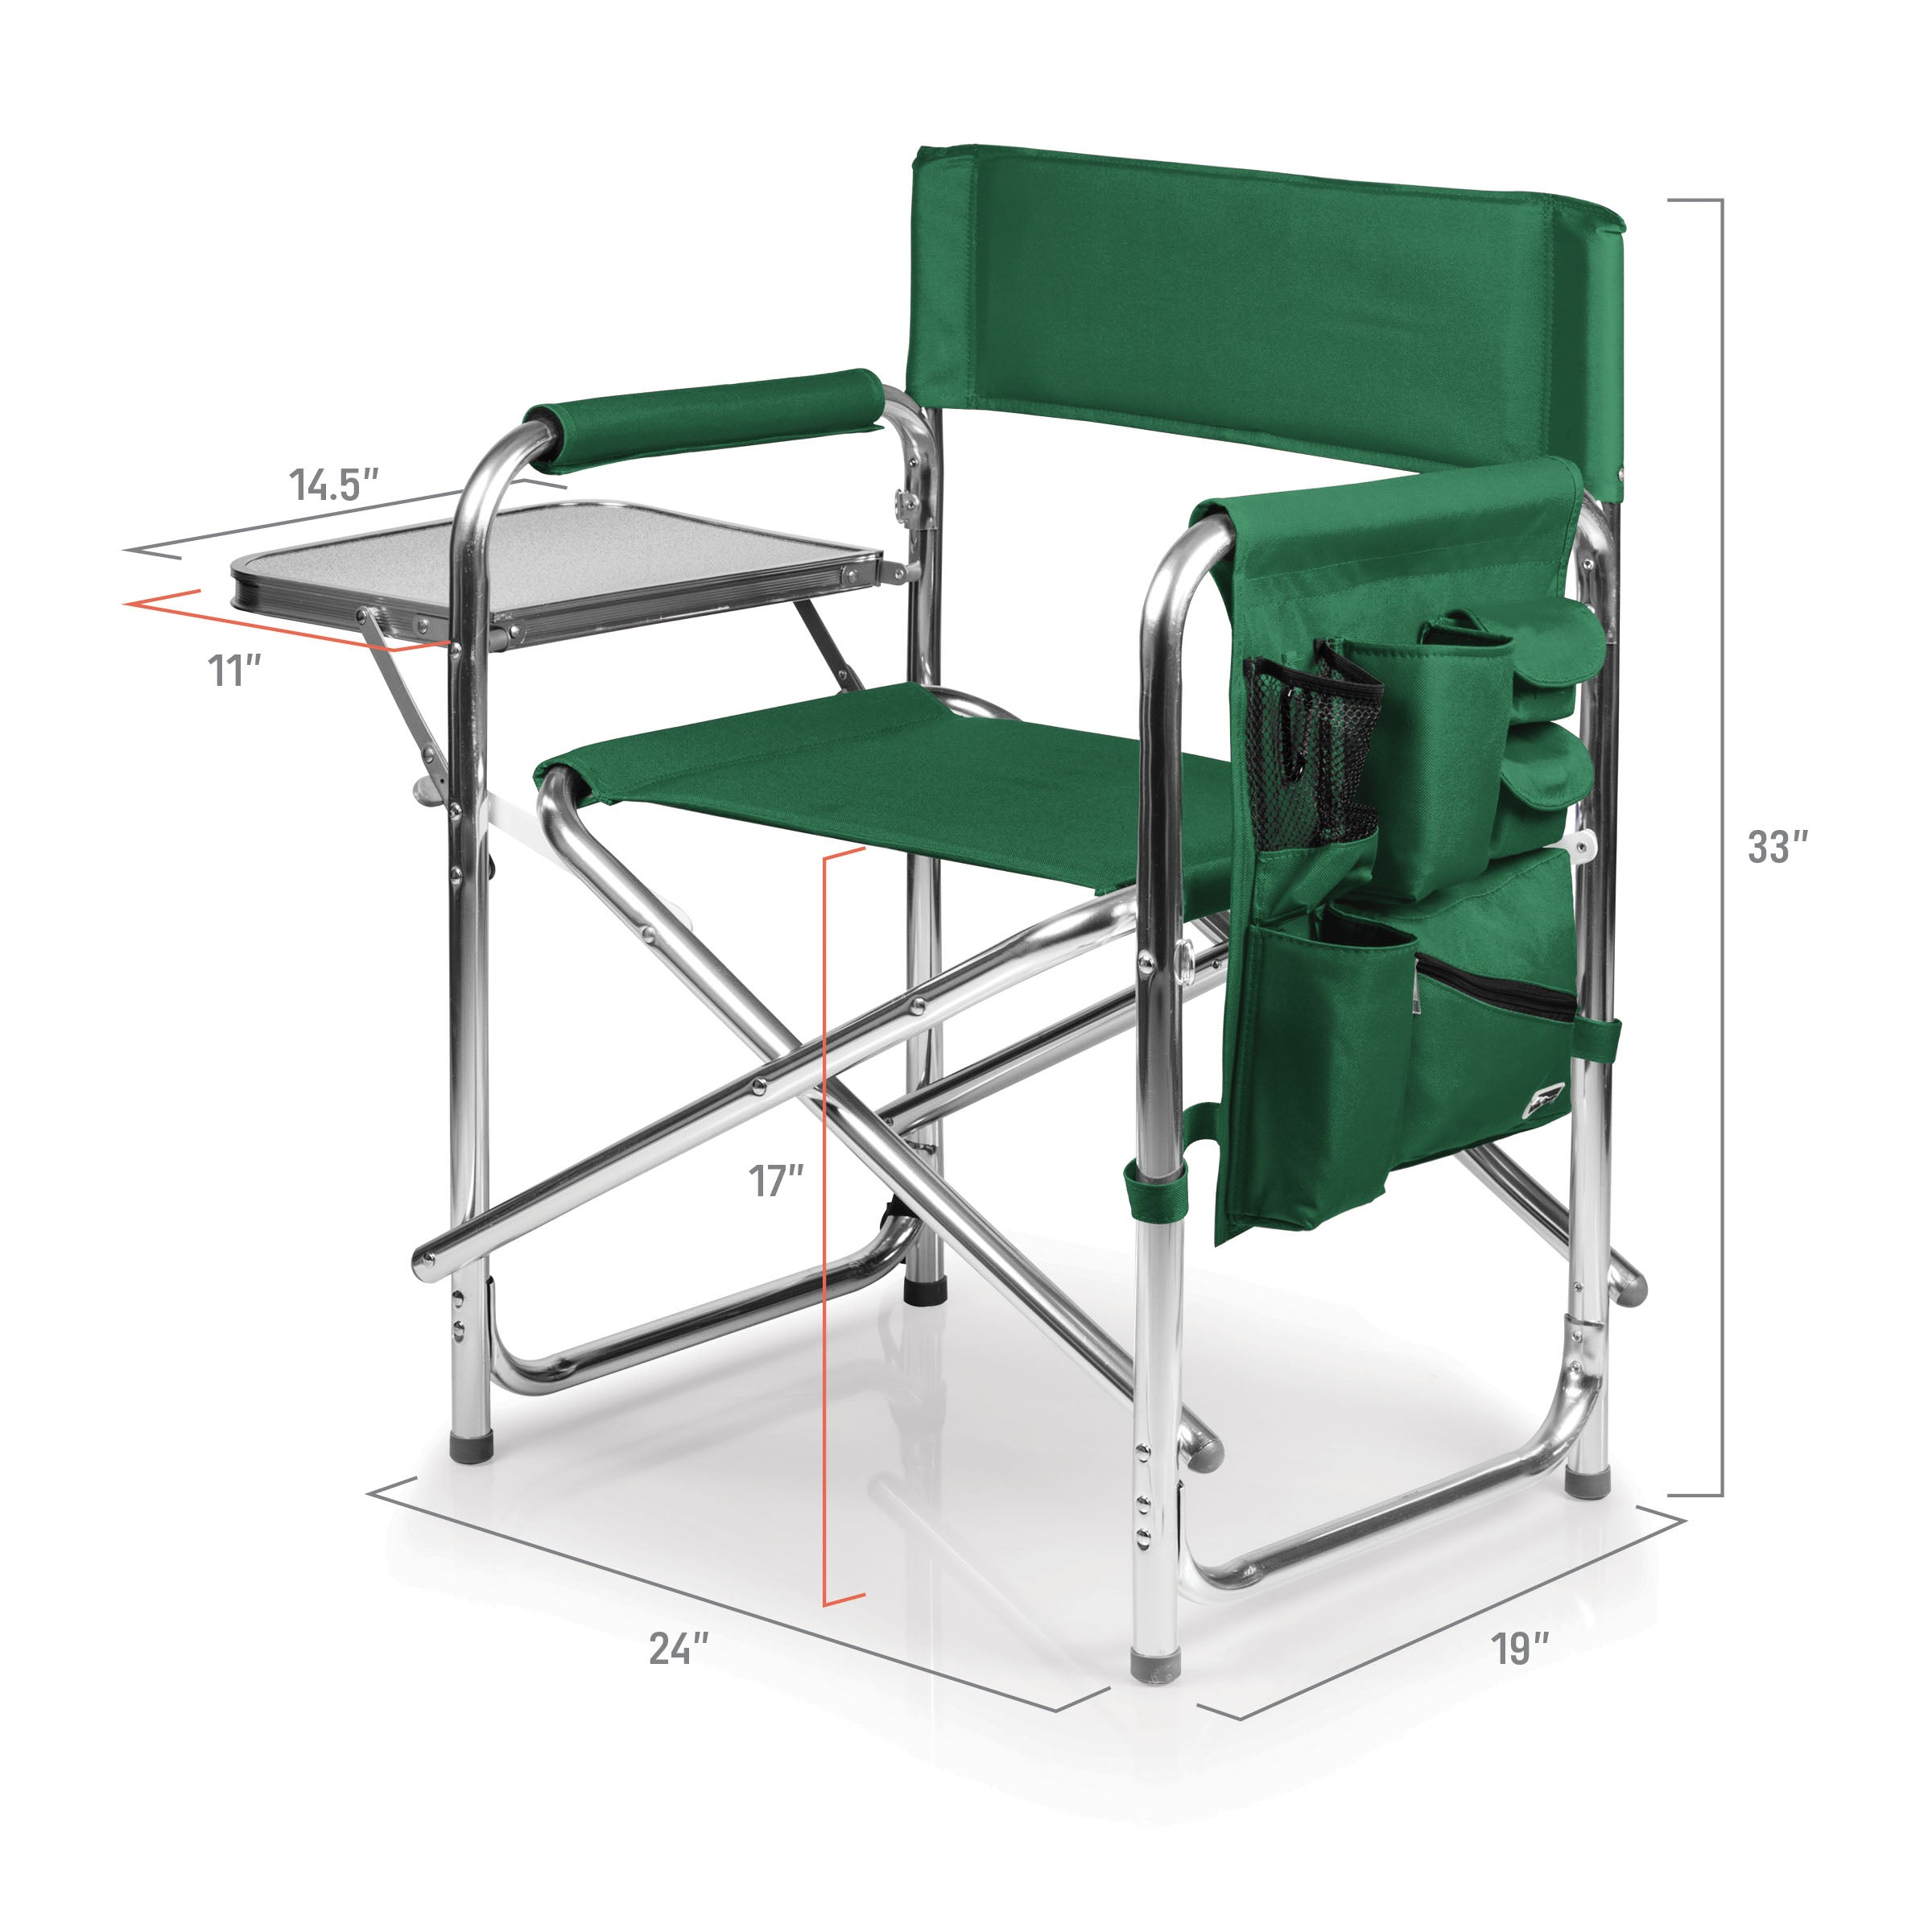 Colorado State Rams - Sports Chair